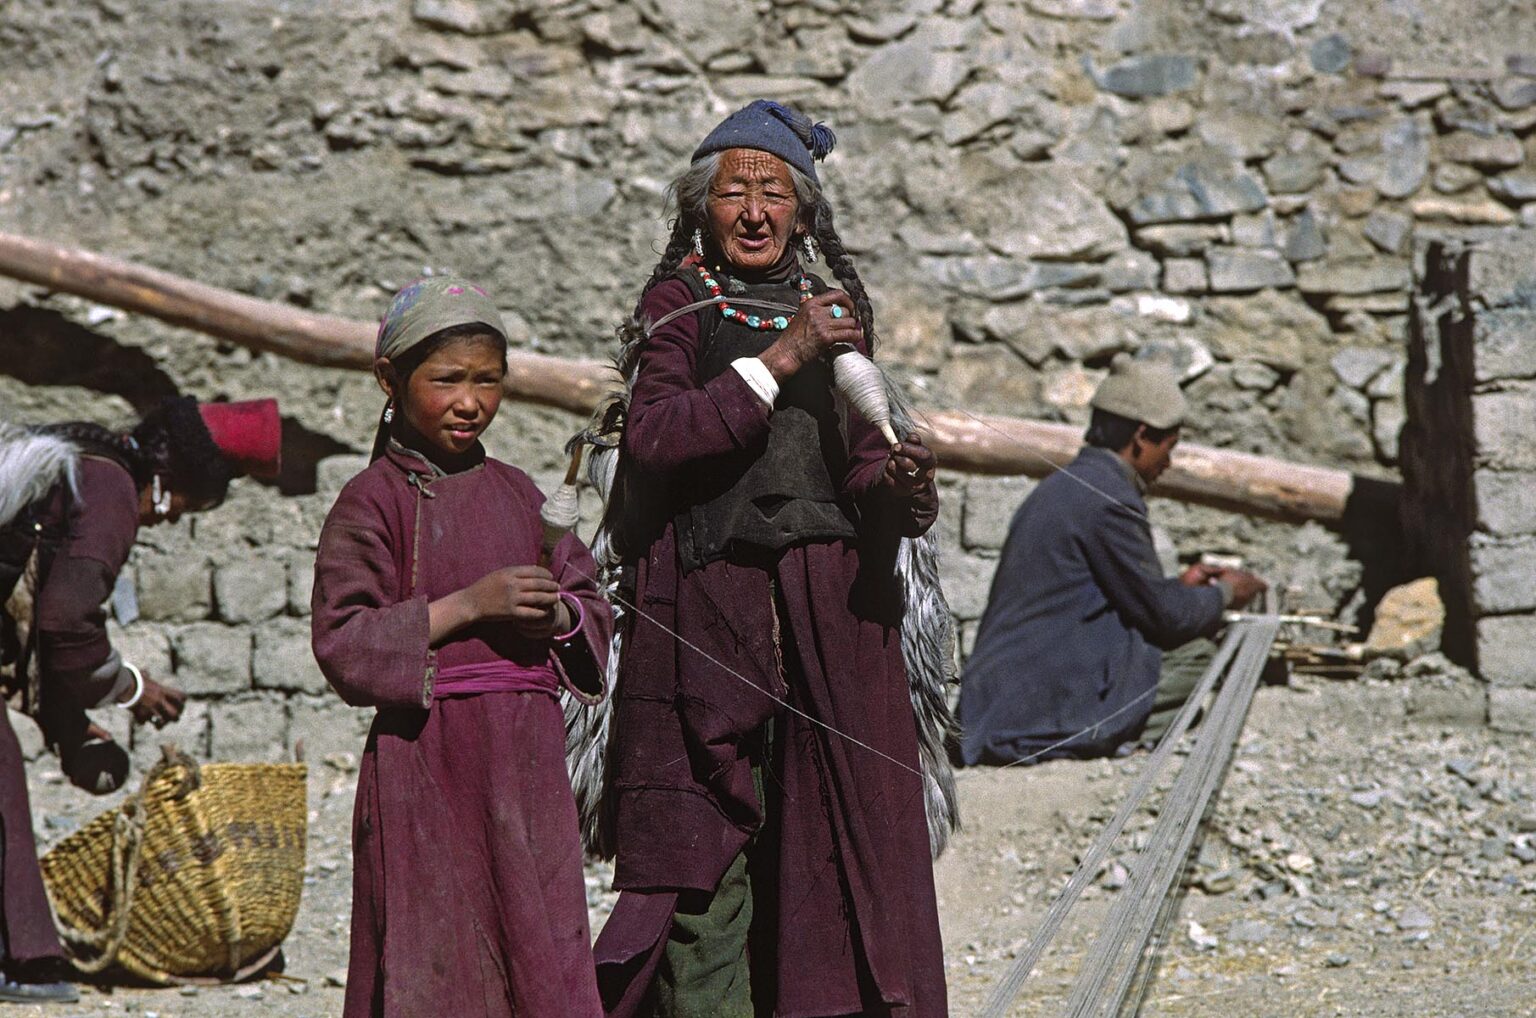 LADAKHI WOMEN wearing HATS and turquoise and coral necklaces preparing a loom to make cloth in LAMAYURU village - LADAKH, INDIA